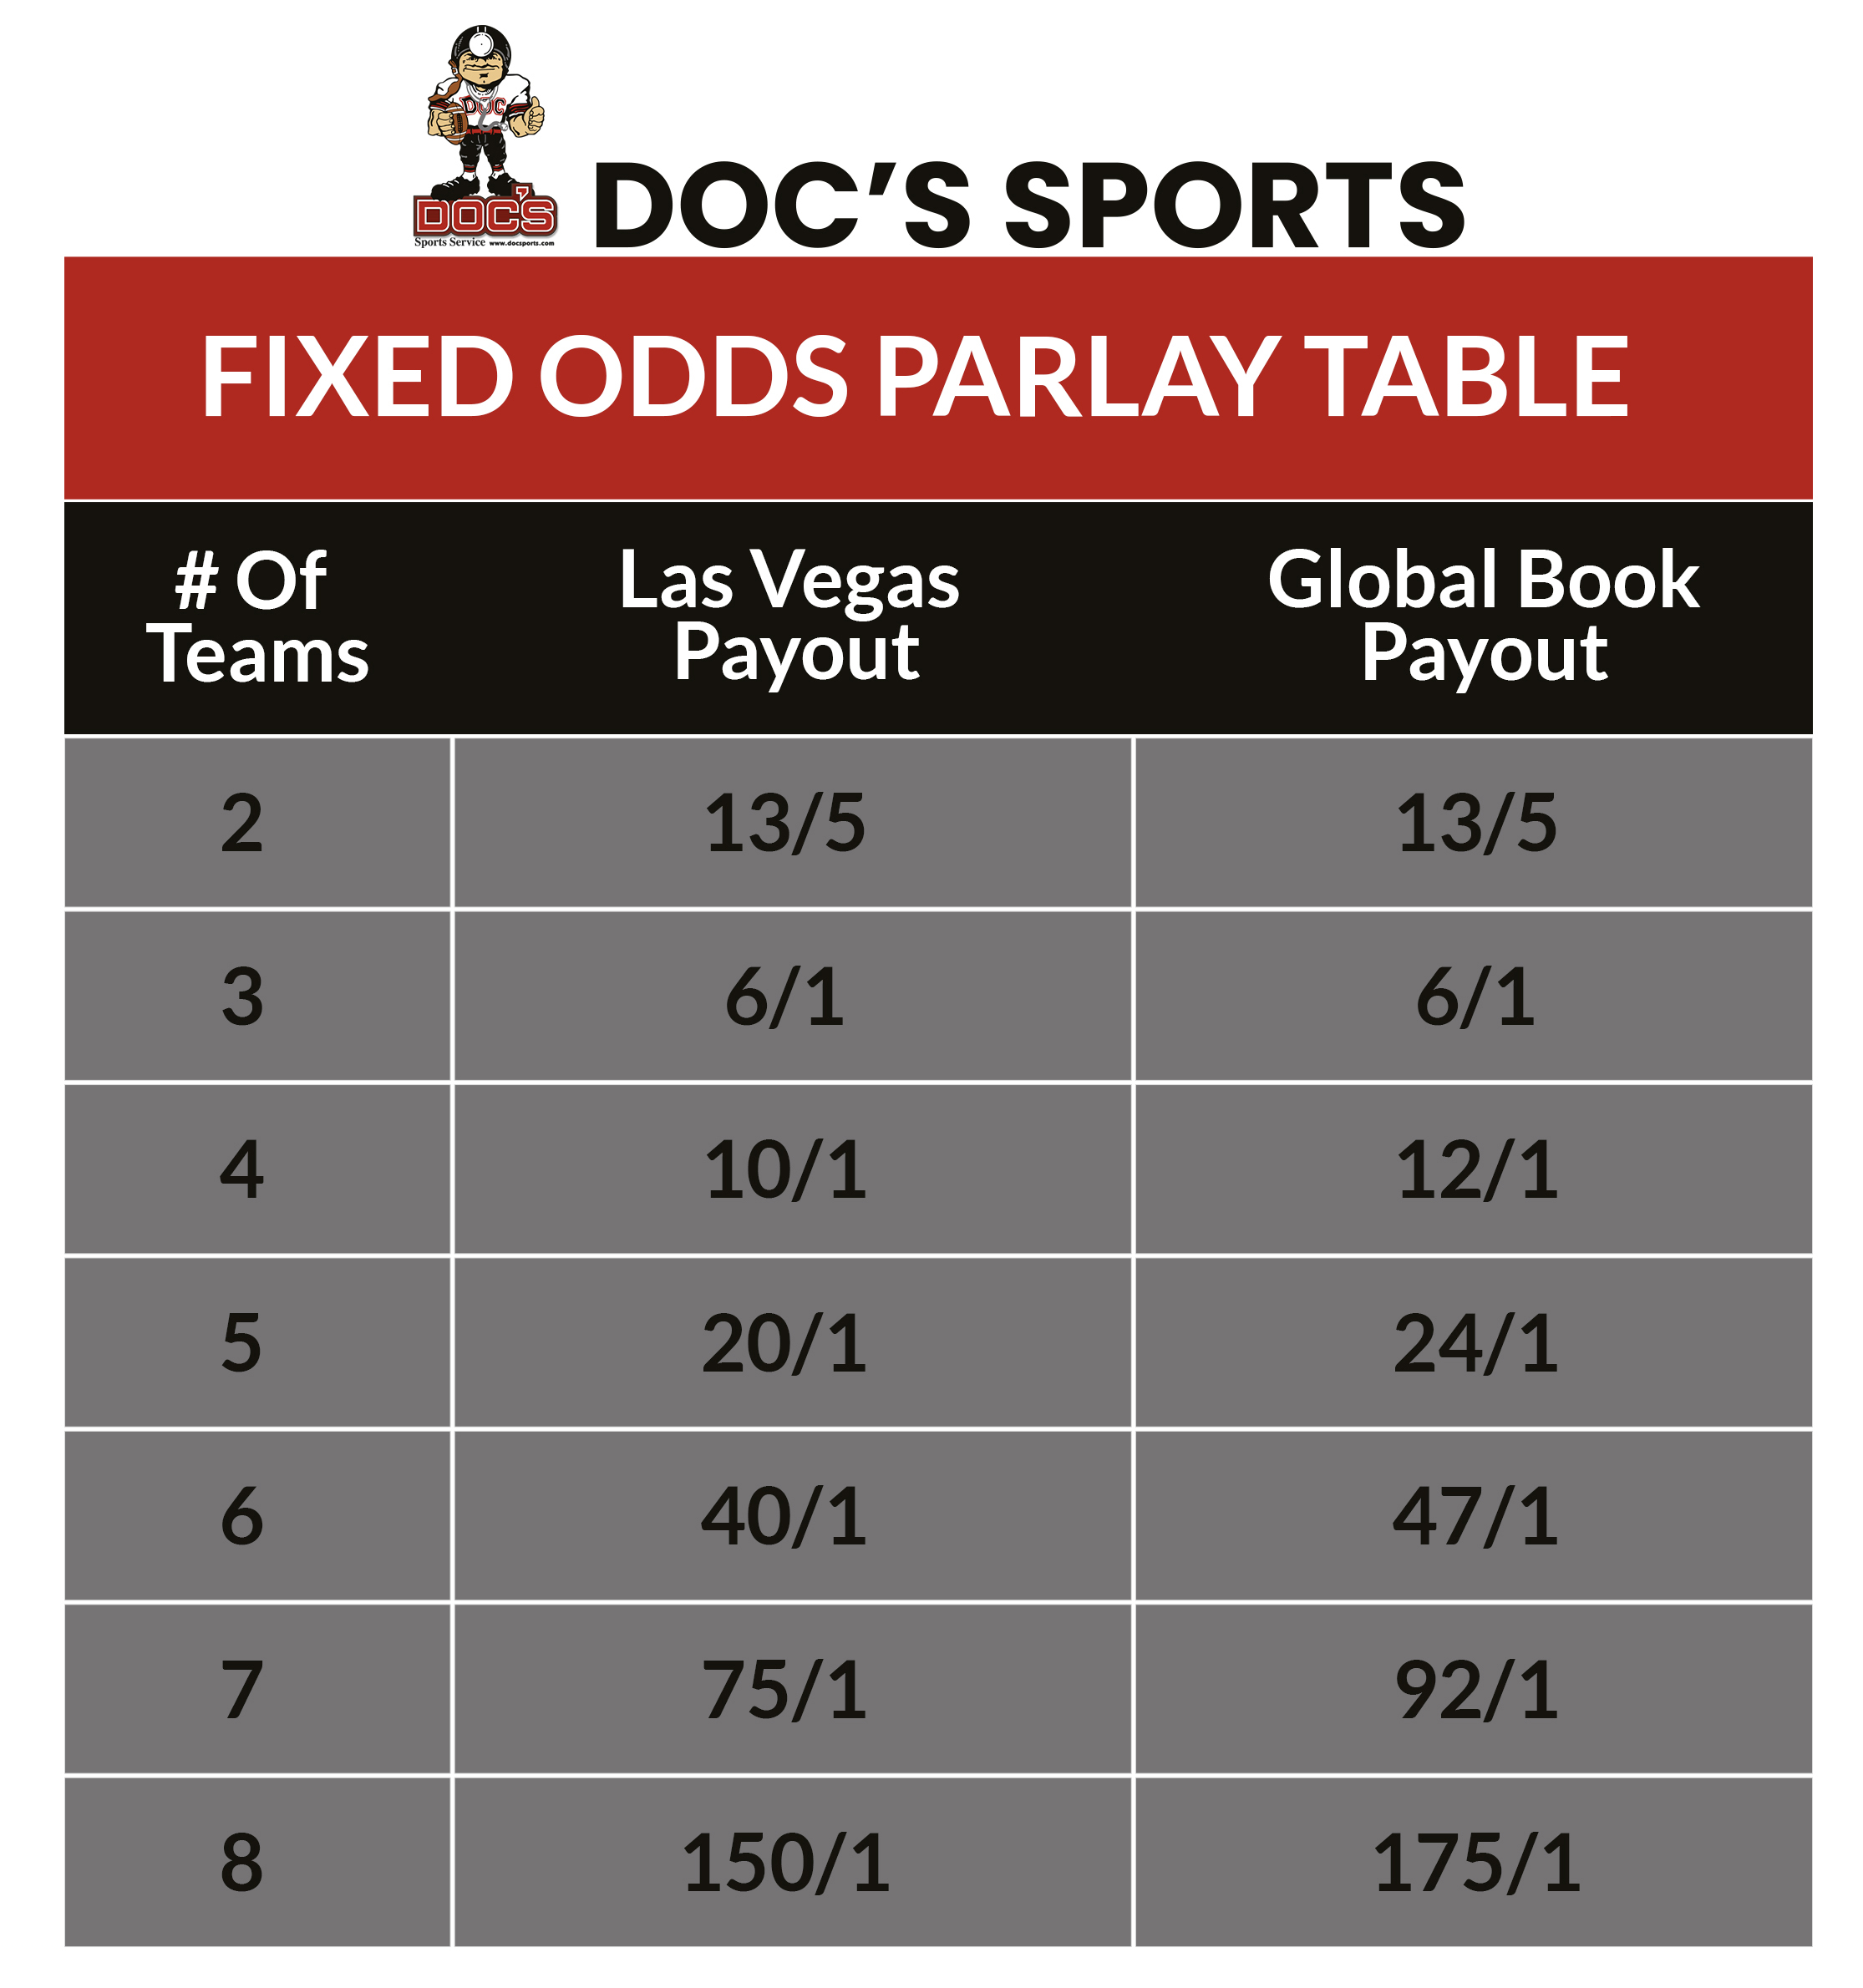 Parlay odds and payours for fixed odds and Las Vegas parlays